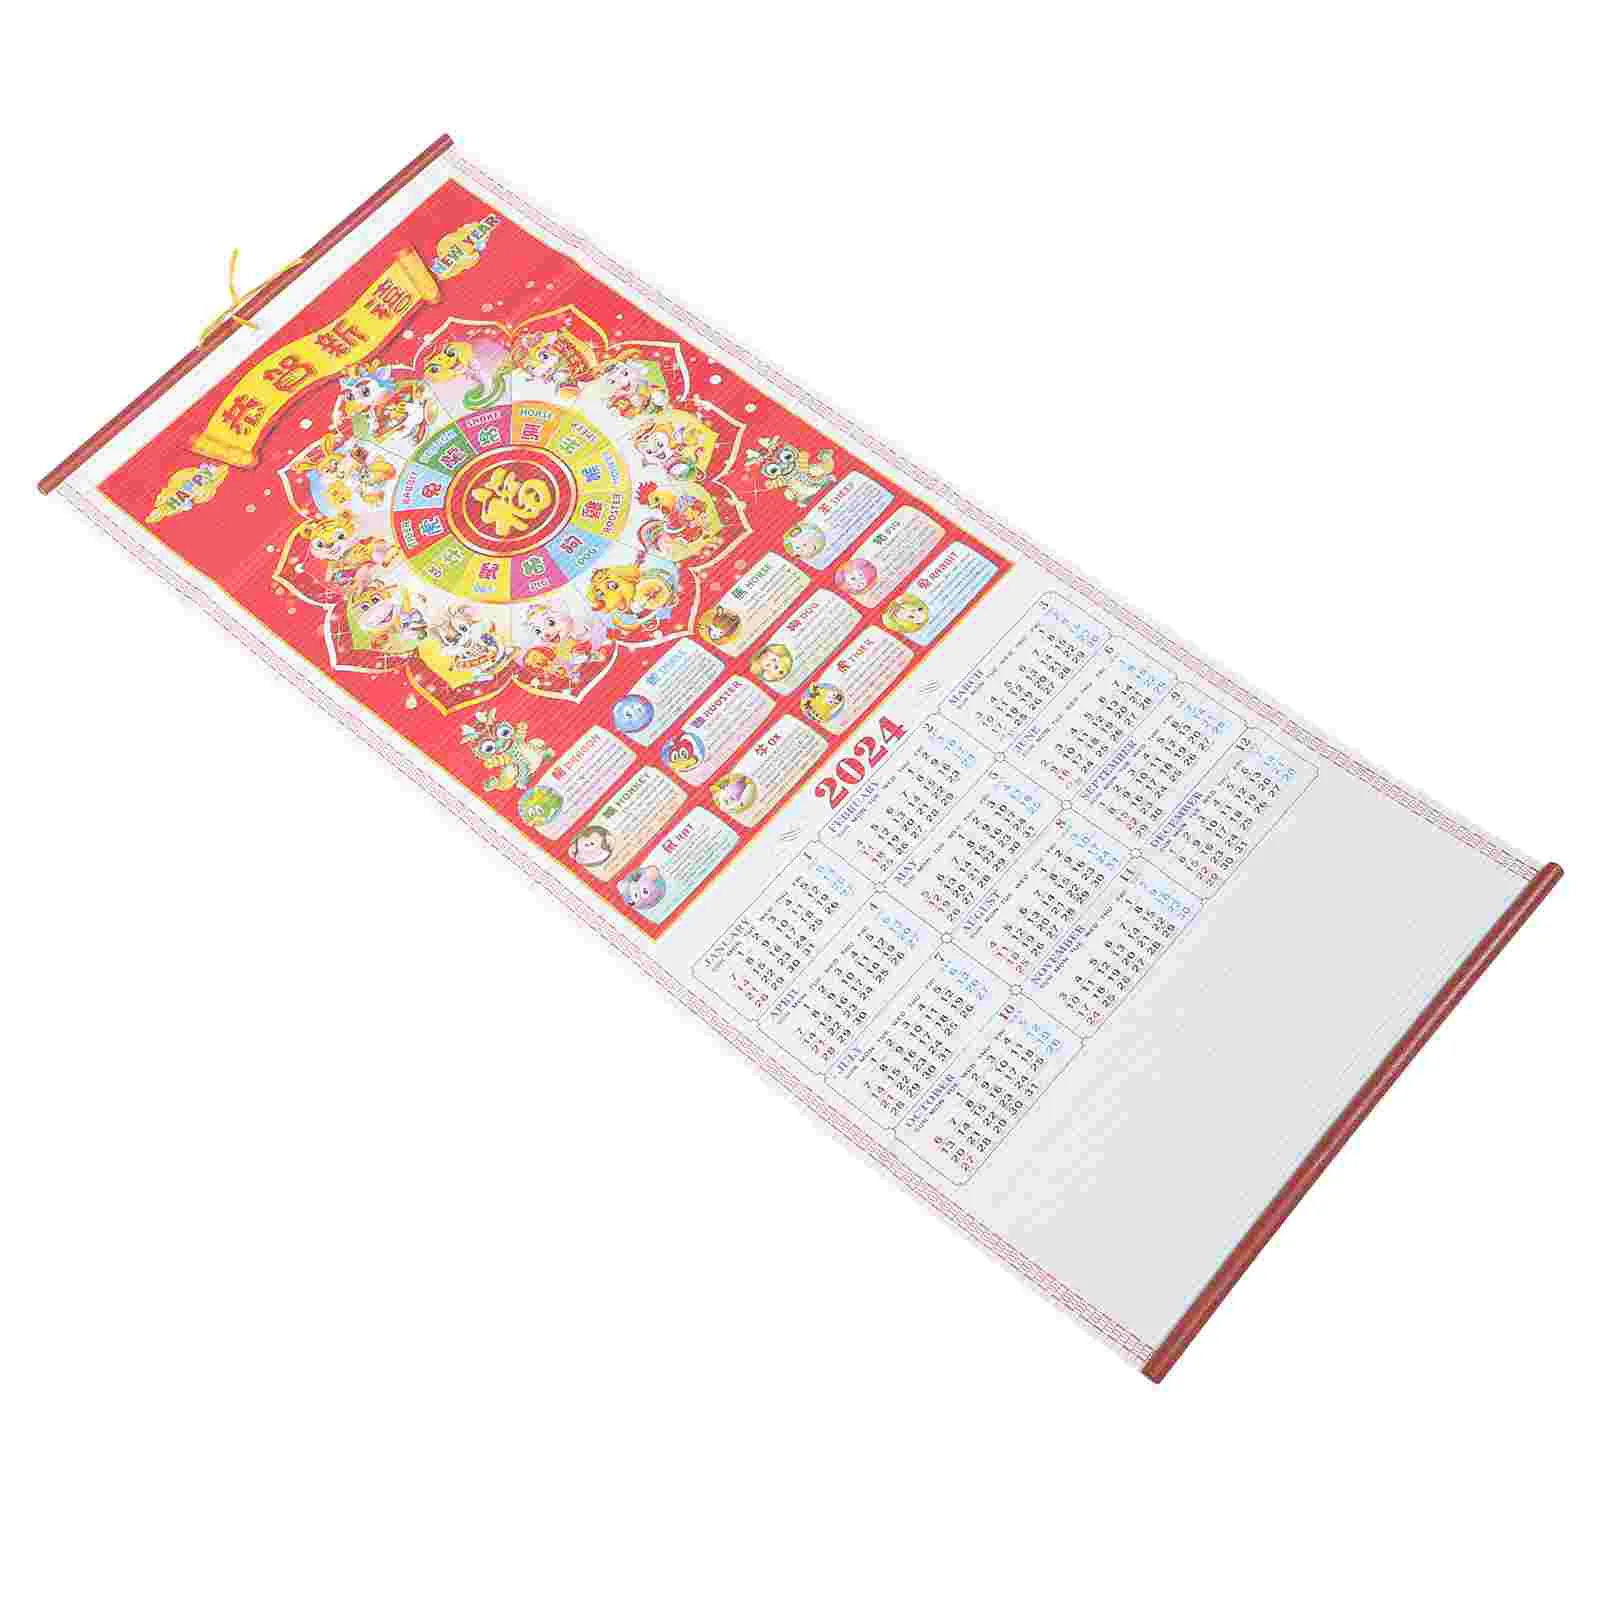 

New Year Wall Calendar 2024 Home Office Chinese 2024 Wall Calendar Wall Calendar Hanging Calendar for School Office Home Room